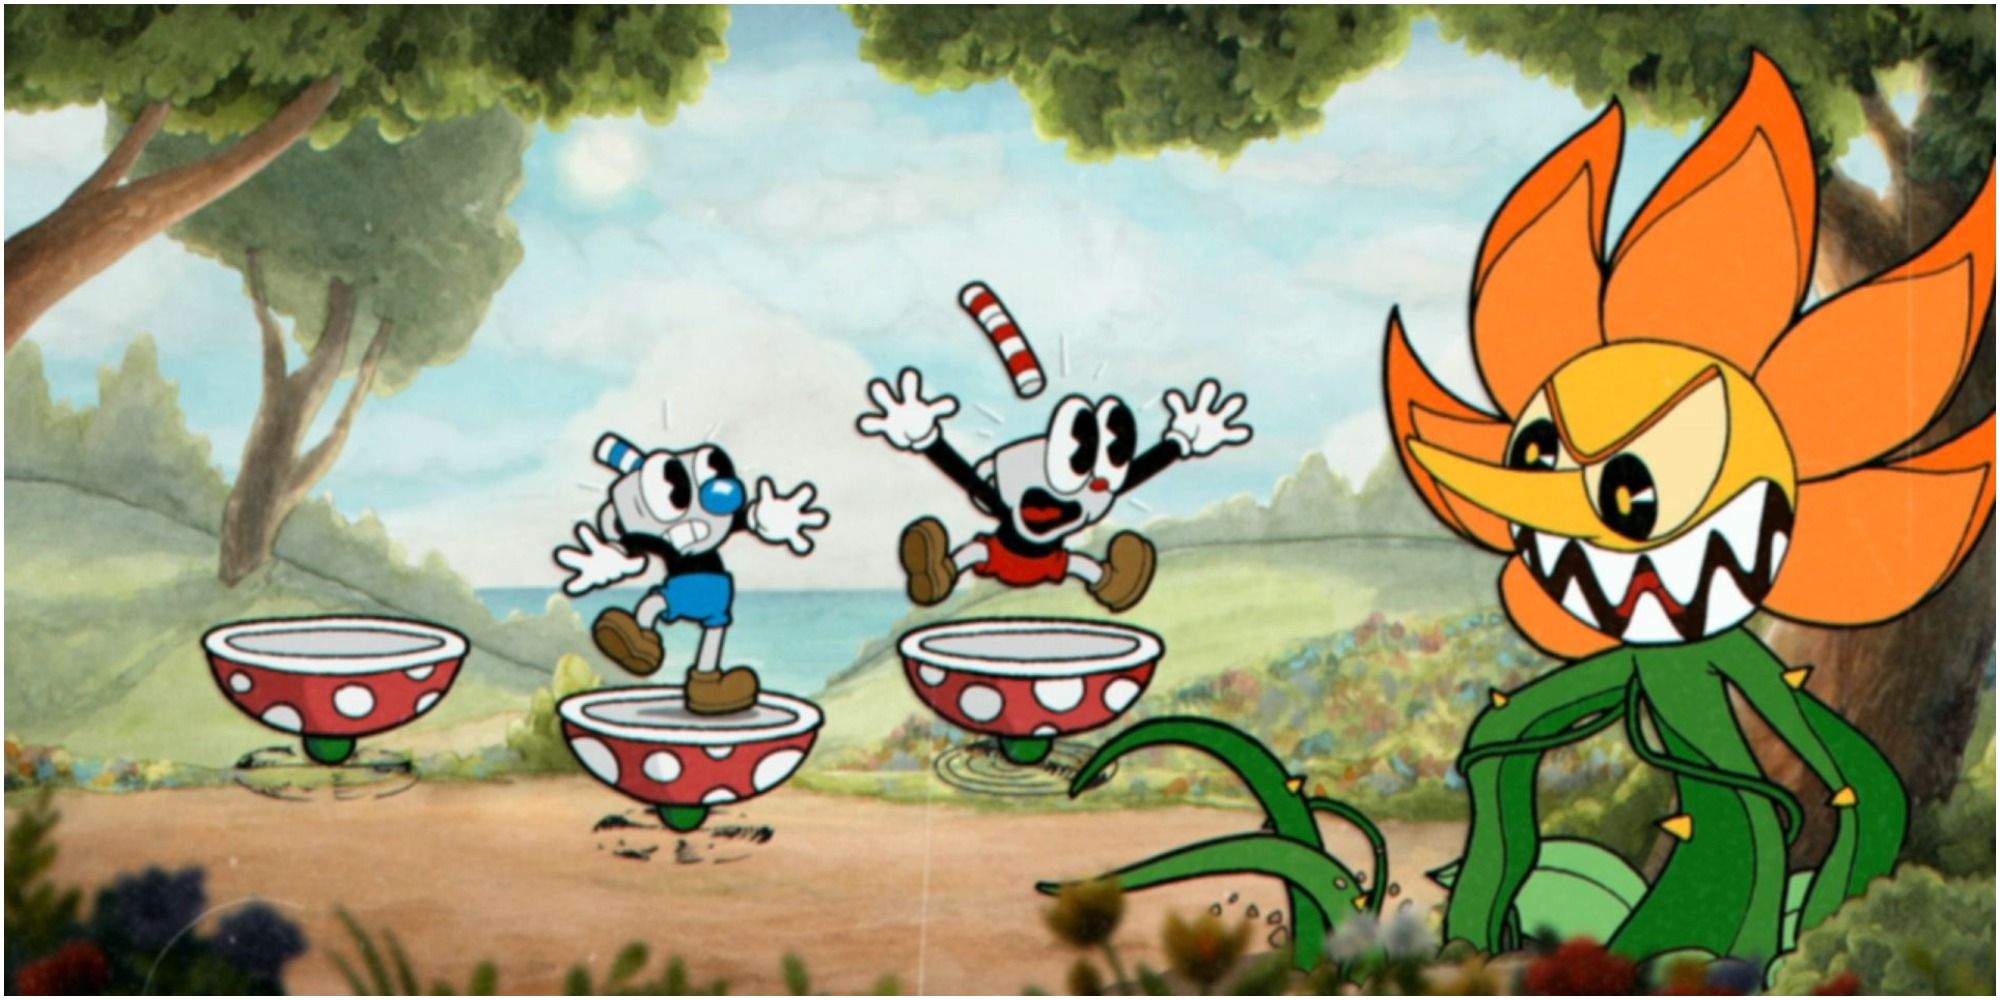 Cuphead First Encounter With The Flower In Its Angry Form